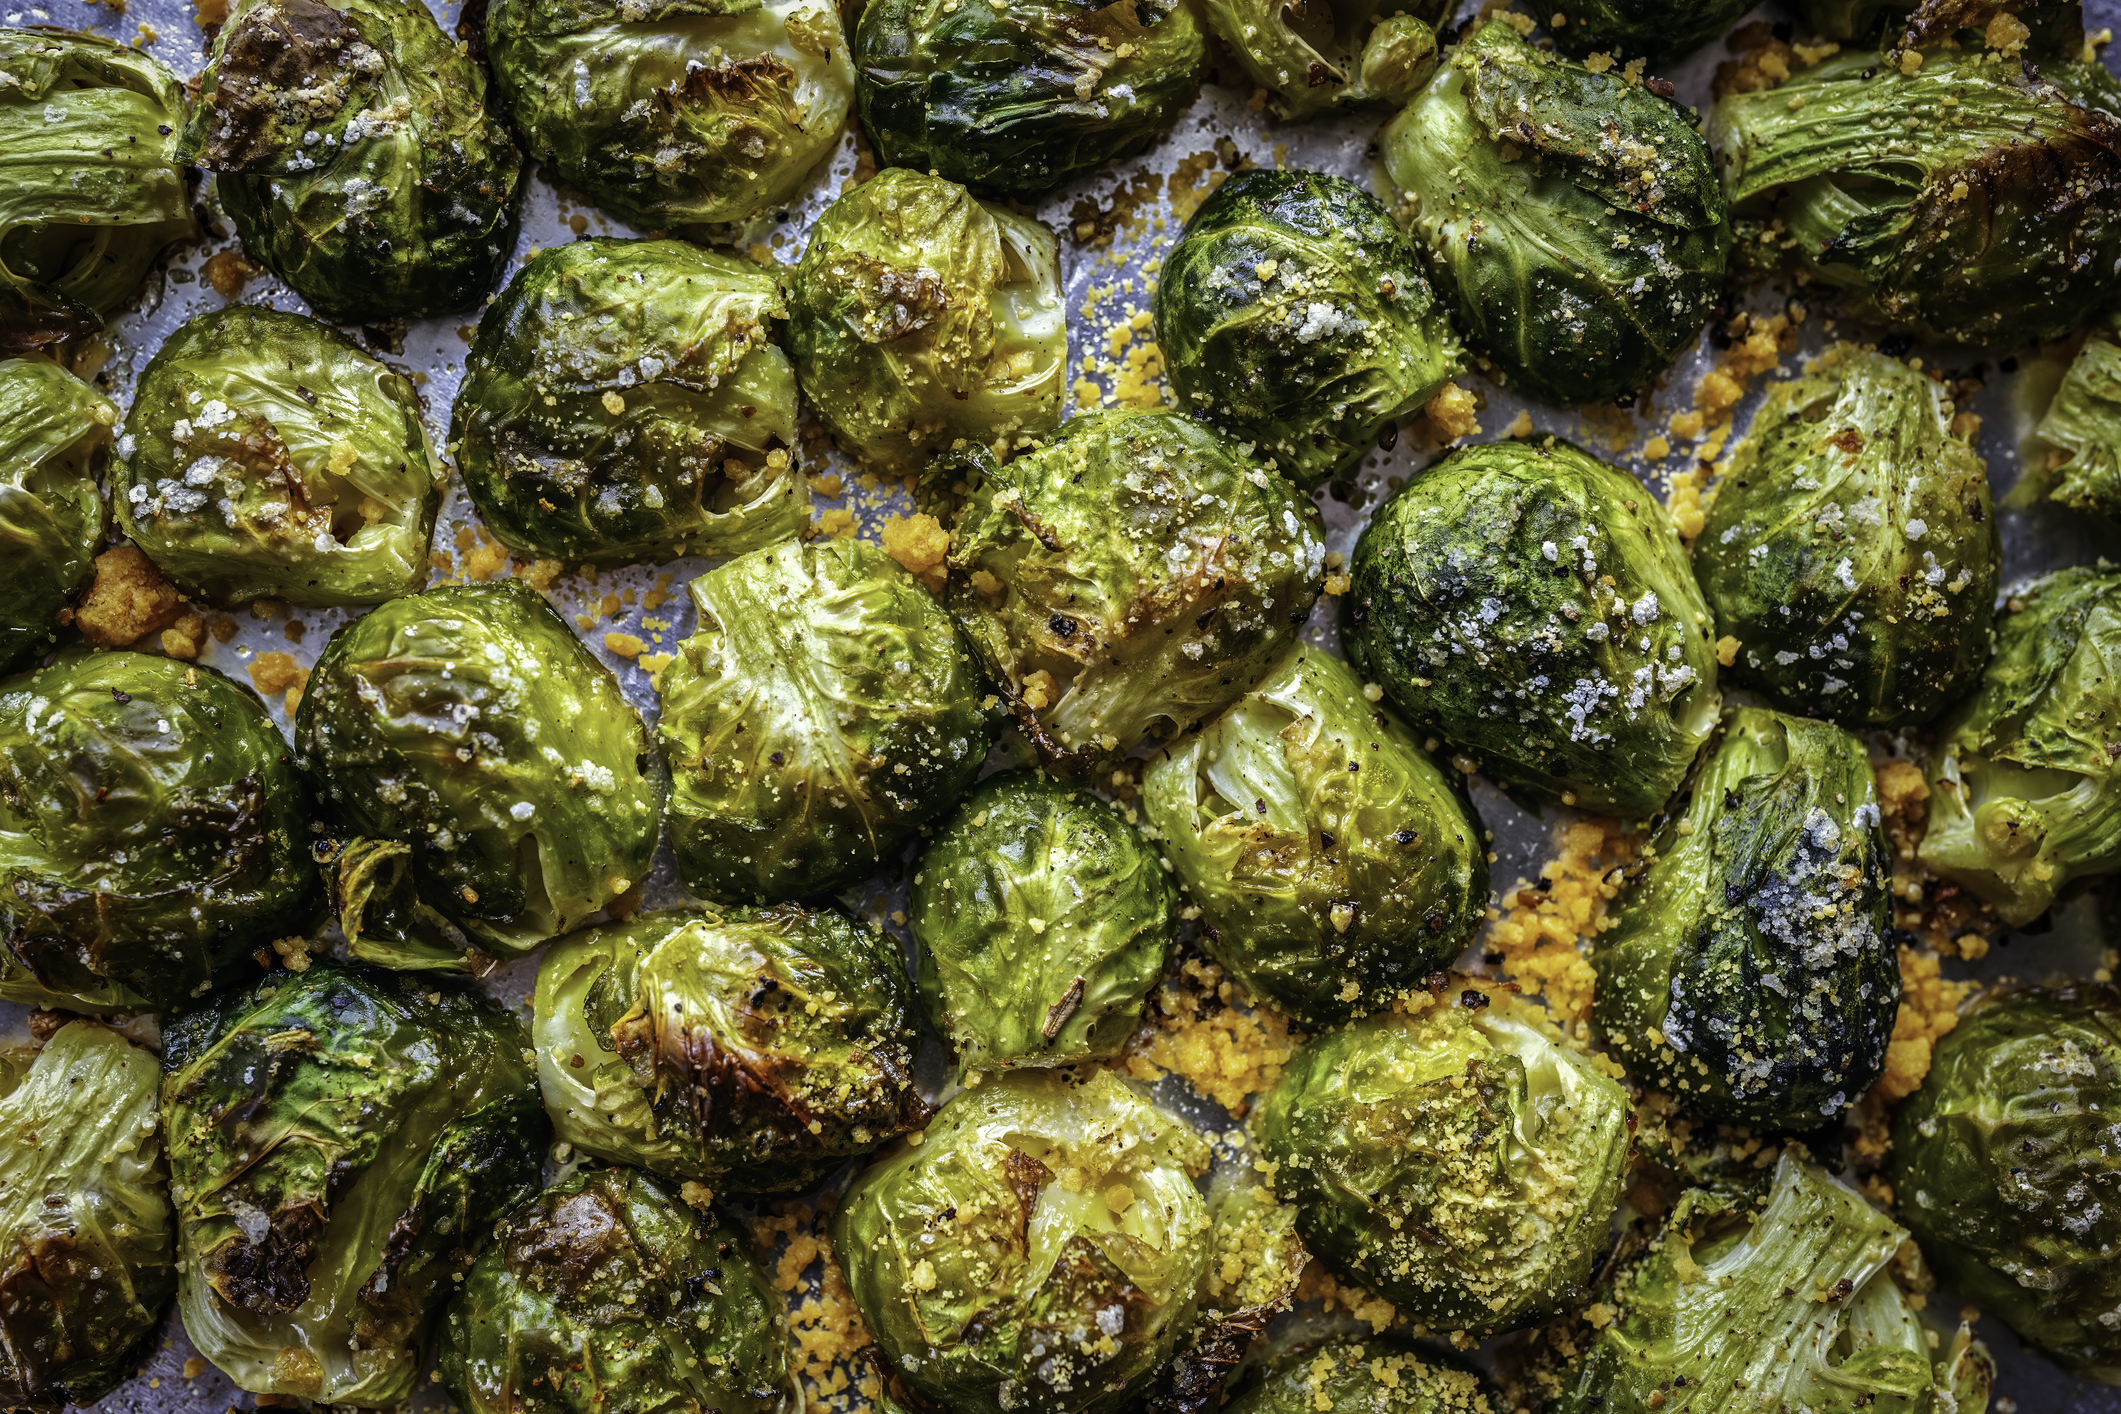 Roasted Brussels sprouts on a baking sheet, some with charred leaves, indicating crispiness